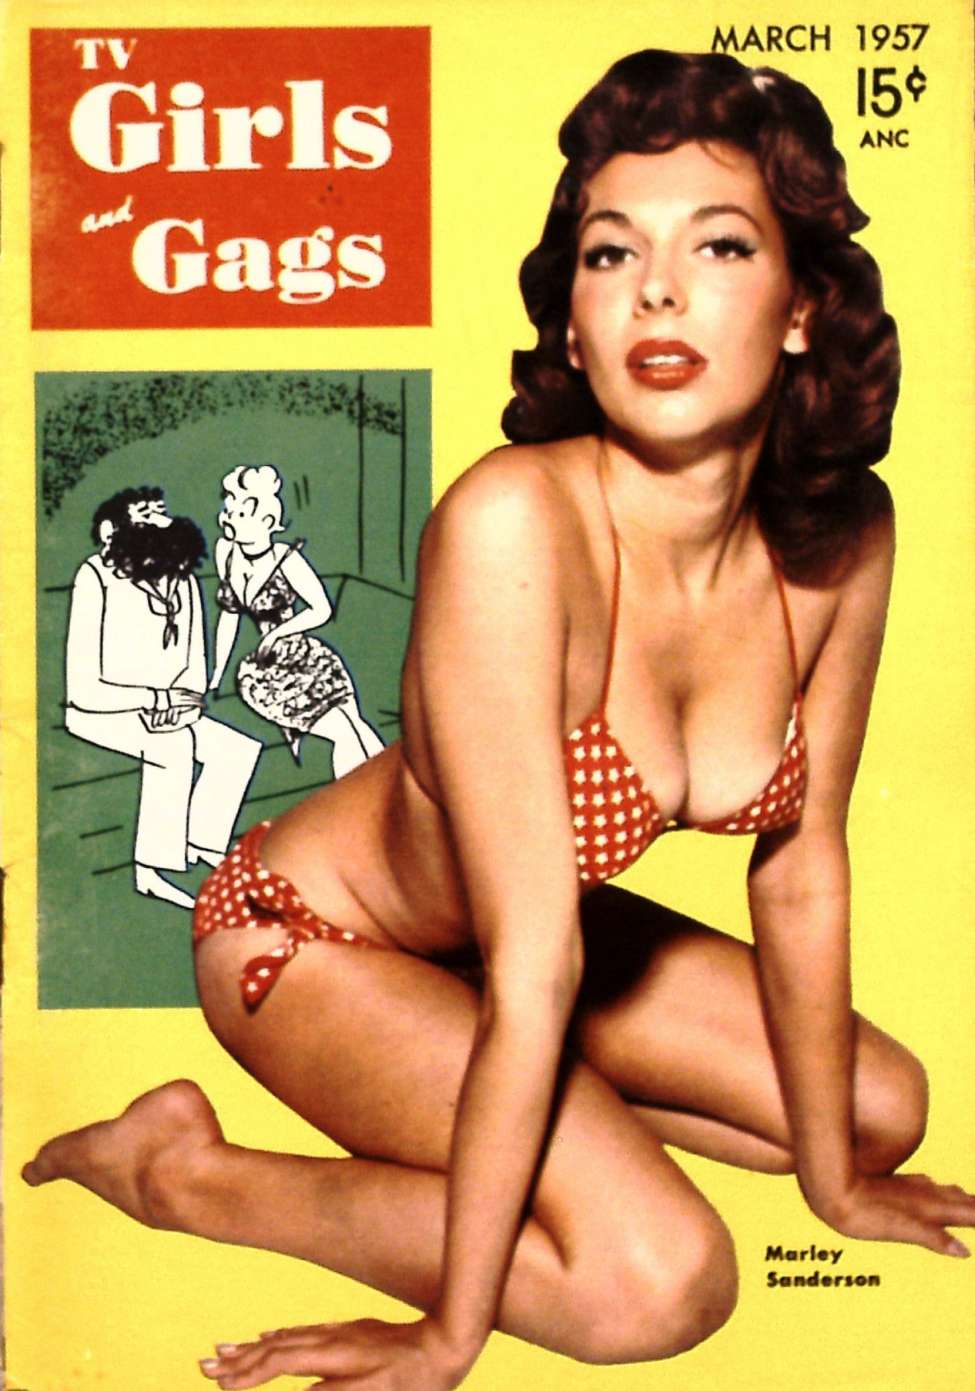 Book Cover For TV Girls and Gags v4 2